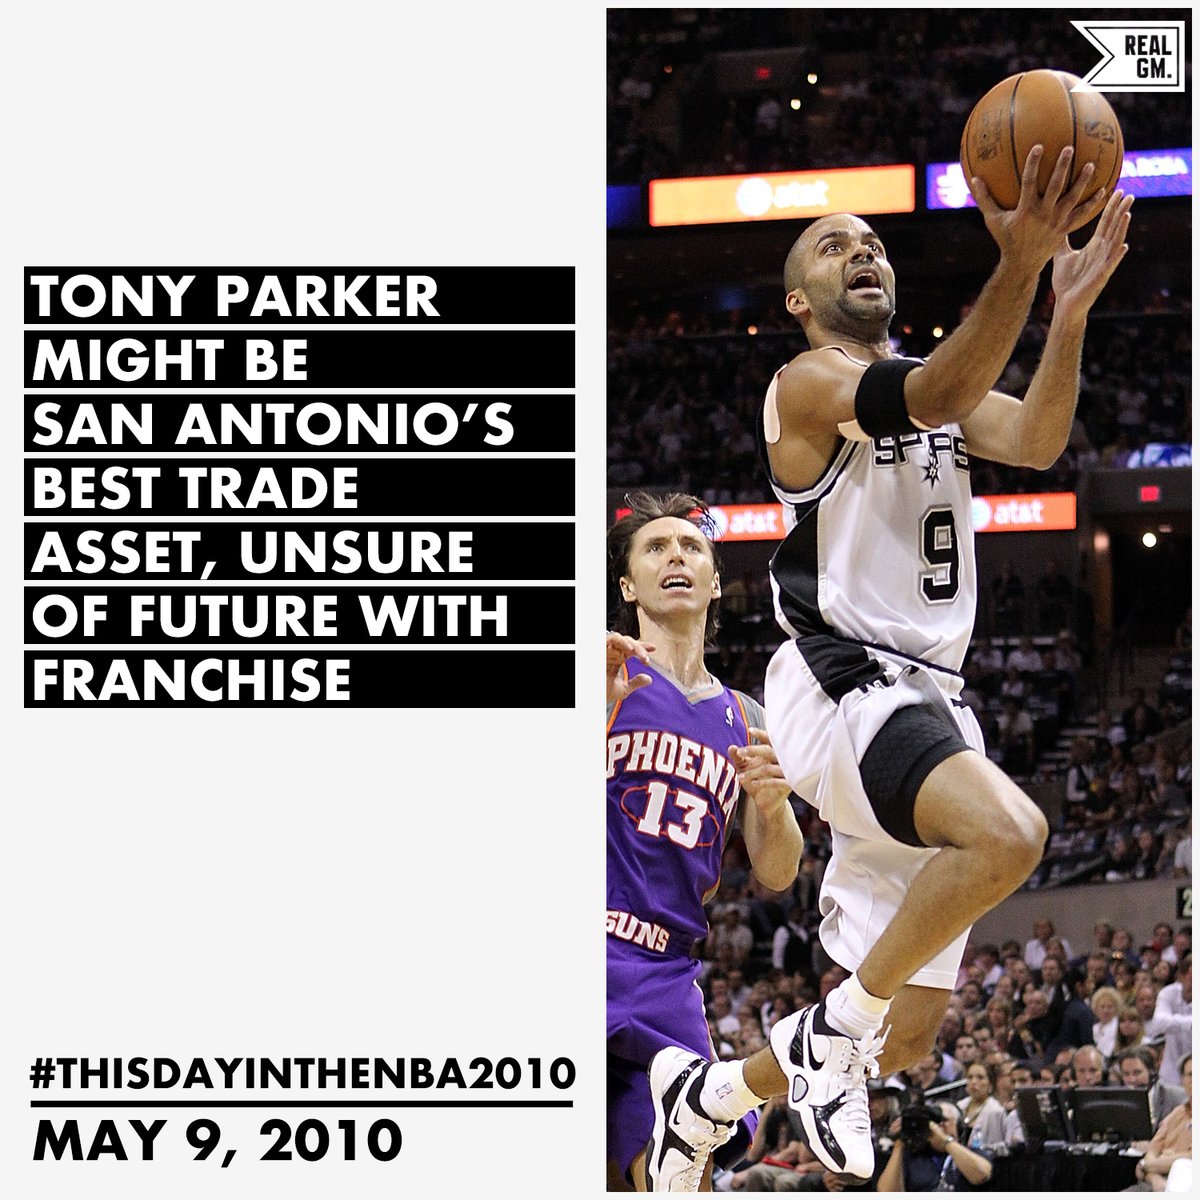  #ThisDayInTheNBA2010May 9, 2010Tony Parker Might Be San Antonio's Best Trade Asset, Unsure Of Future With Franchise https://basketball.realgm.com/wiretap/203789/Tony-Parker-Might-Be-San-Antonios-Best-Trade-Asset-Unsure-Of-Future-With-Franchise